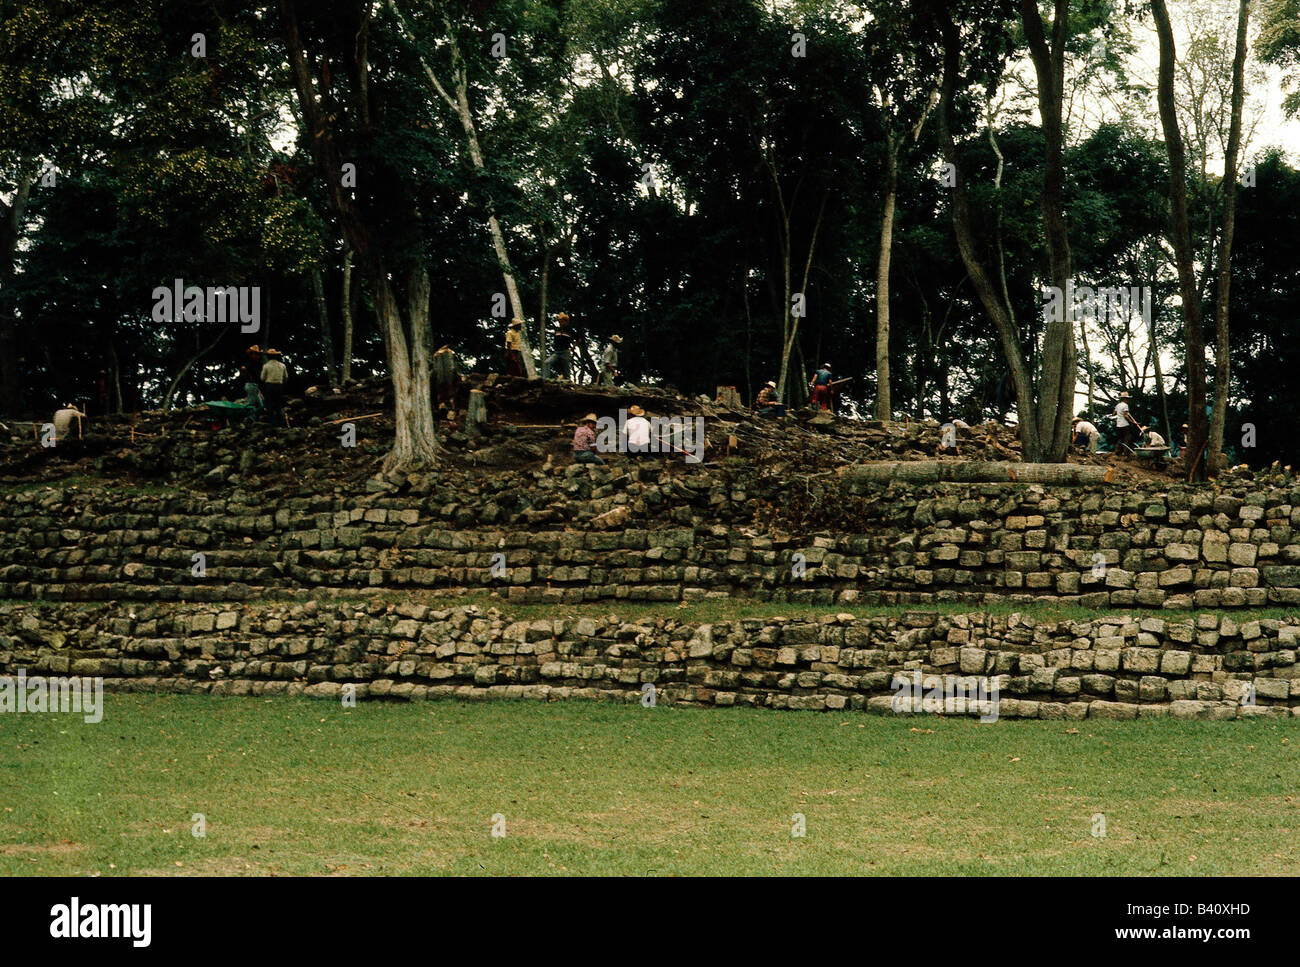 geography / travel, Honduras, Copan, Maya town around 1000 BC - 9th century AD, terraces architecture, wall, America, Central America, Maya, Latin-American Indians, UNESCO, World Heritage Site, historical, historic, ancient, latin american, CEAM, ruins, ruin, 20th century, Stock Photo